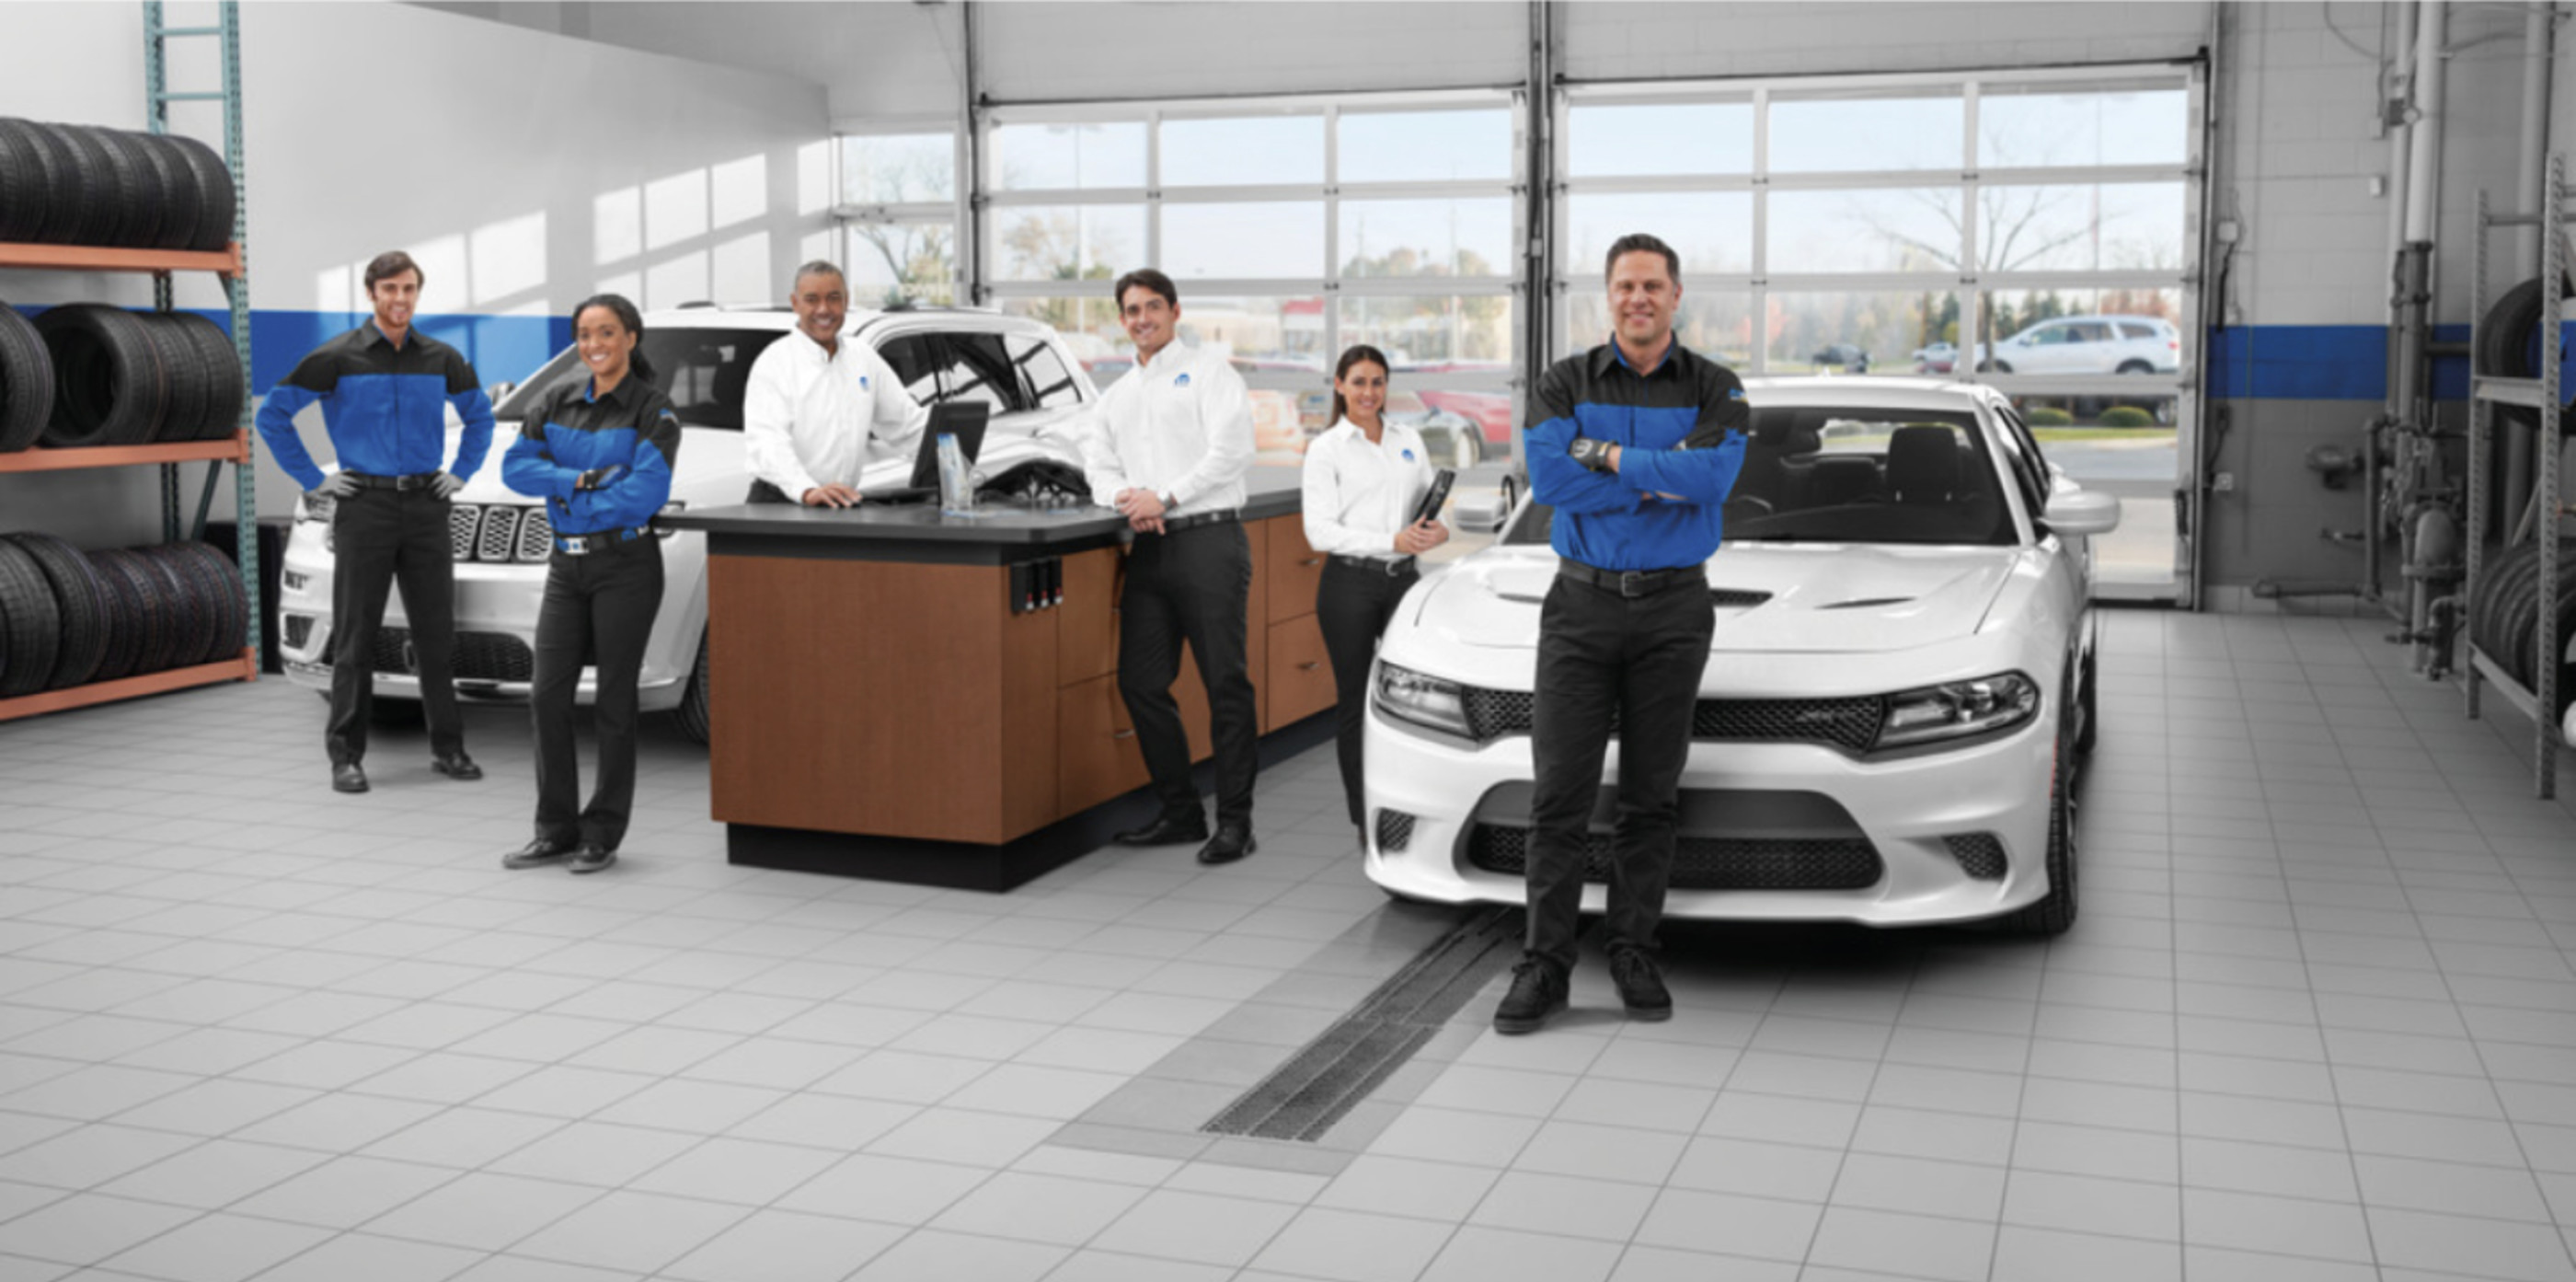 Several Mopar service specialists ready to welcome customers to a store.